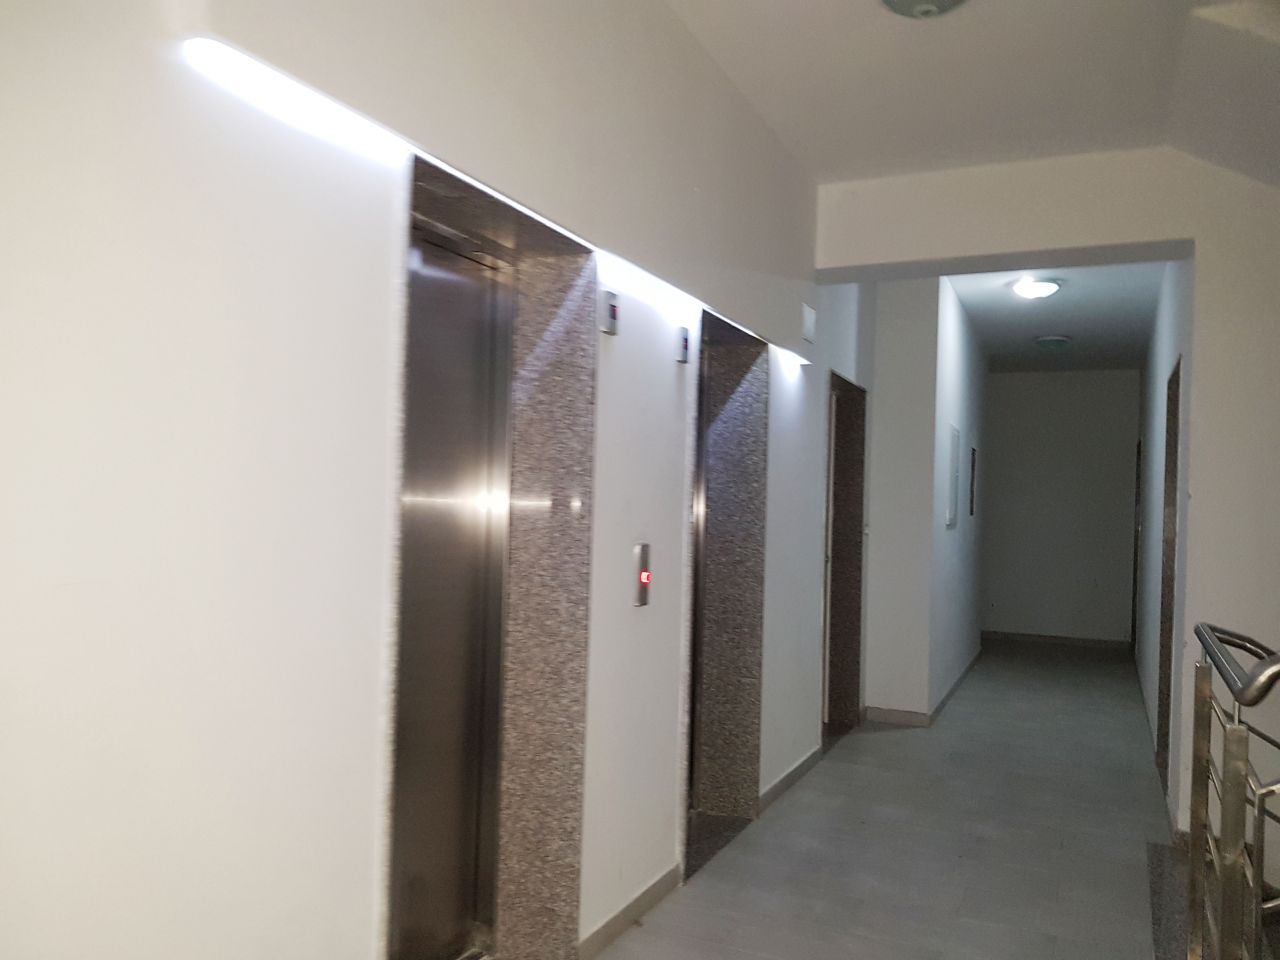 Two bedroom Apartment for Rent in Tirana